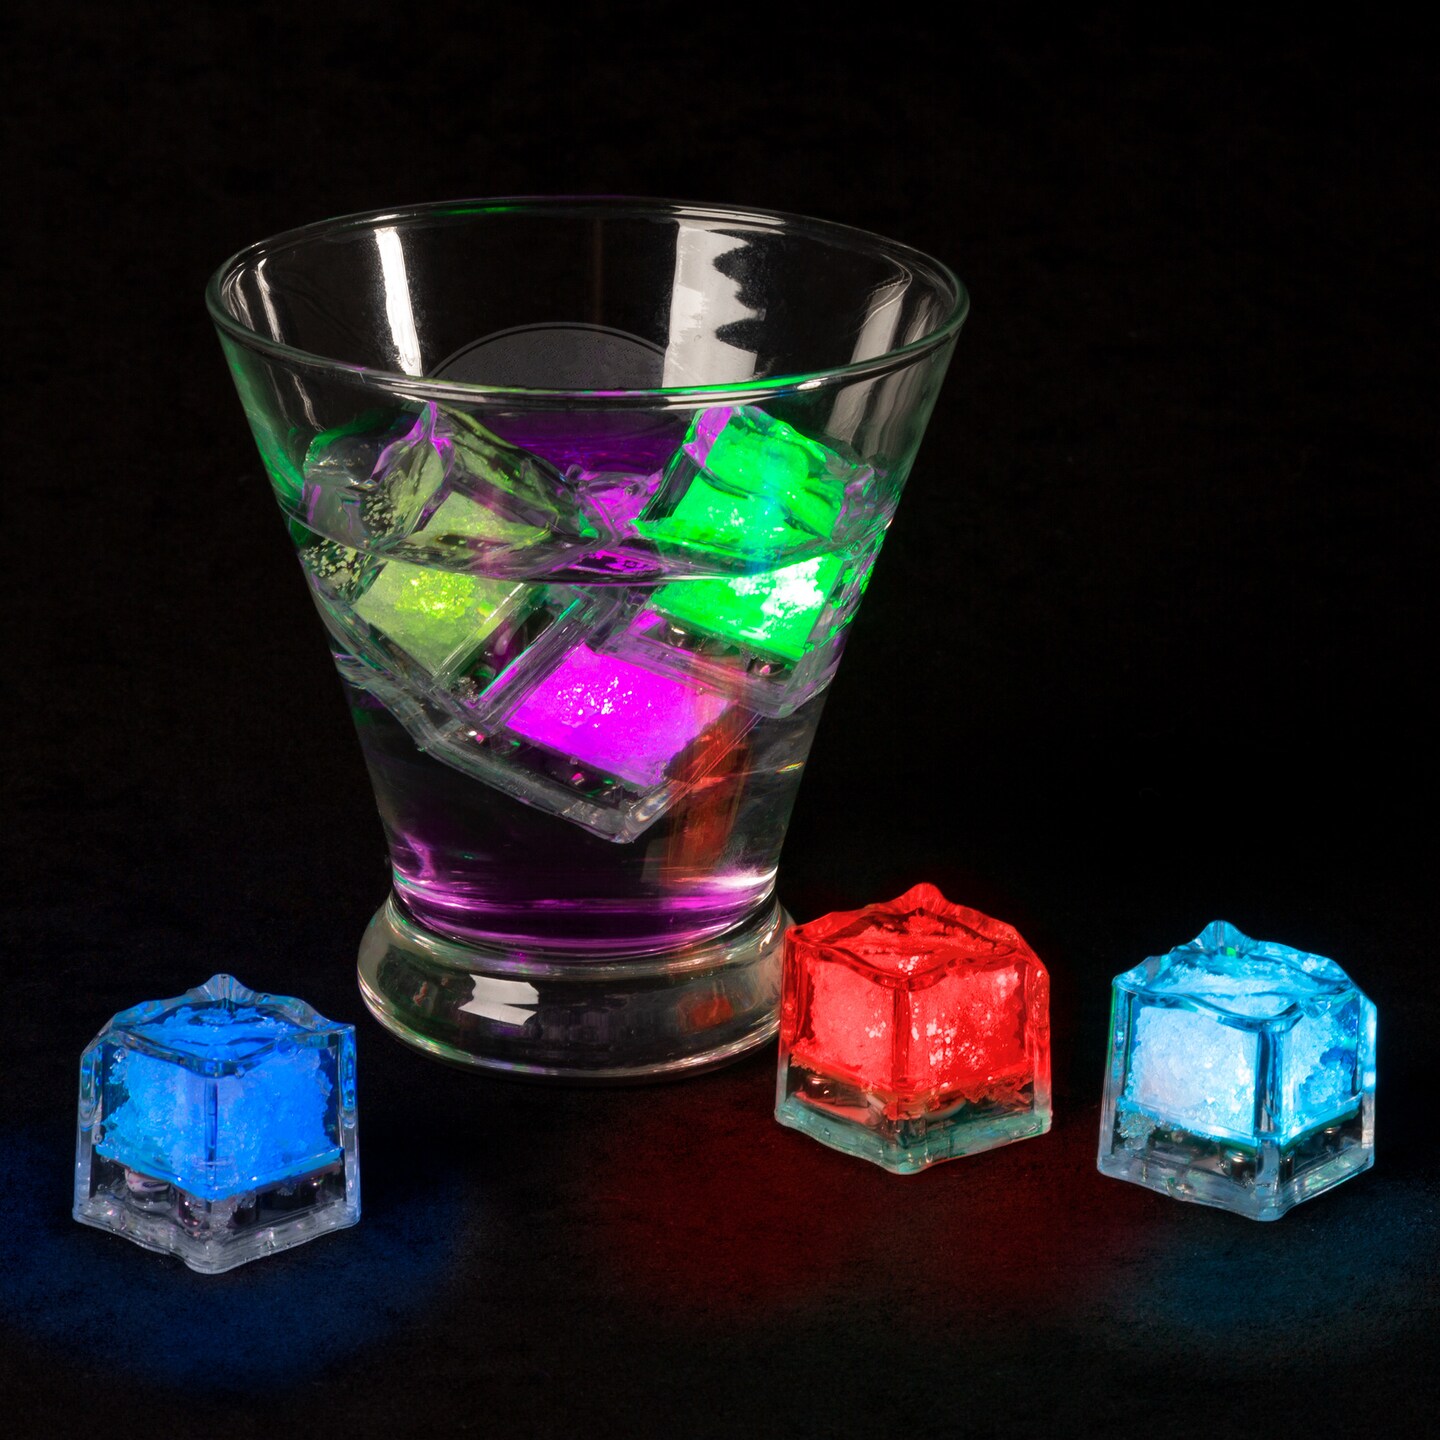 Lavish Home 12 LED Waterproof Ice Cube Shaped Lights Drinks Wine Light Up Water Activated